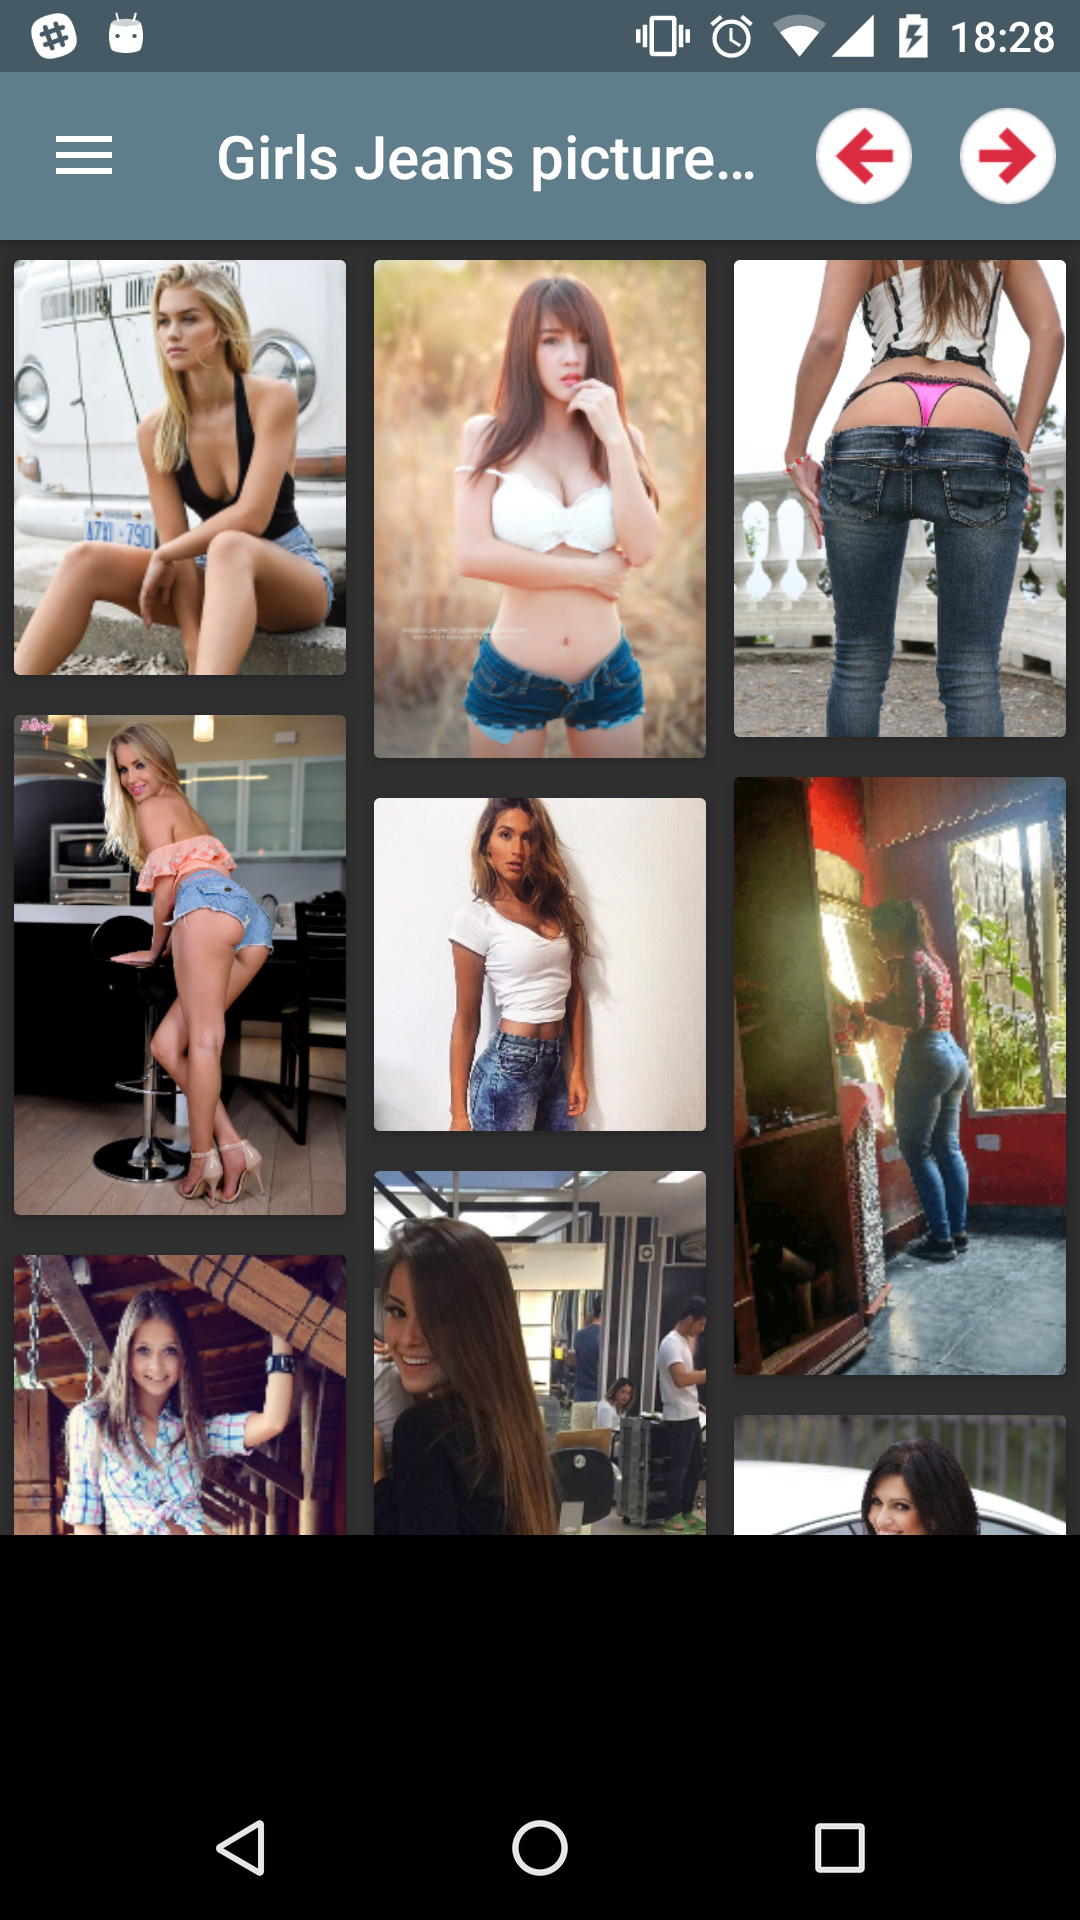 Girls in Jeans photos girls,sexy,hot,app,photo,asses,pic,heanti,panties,free,stars,pics,amateur,pornstars,porn,puzzles,android,hentai,editor,pictures,jeans,mod,erotic,video,dresses,anime,maker,galleries,photos,apk